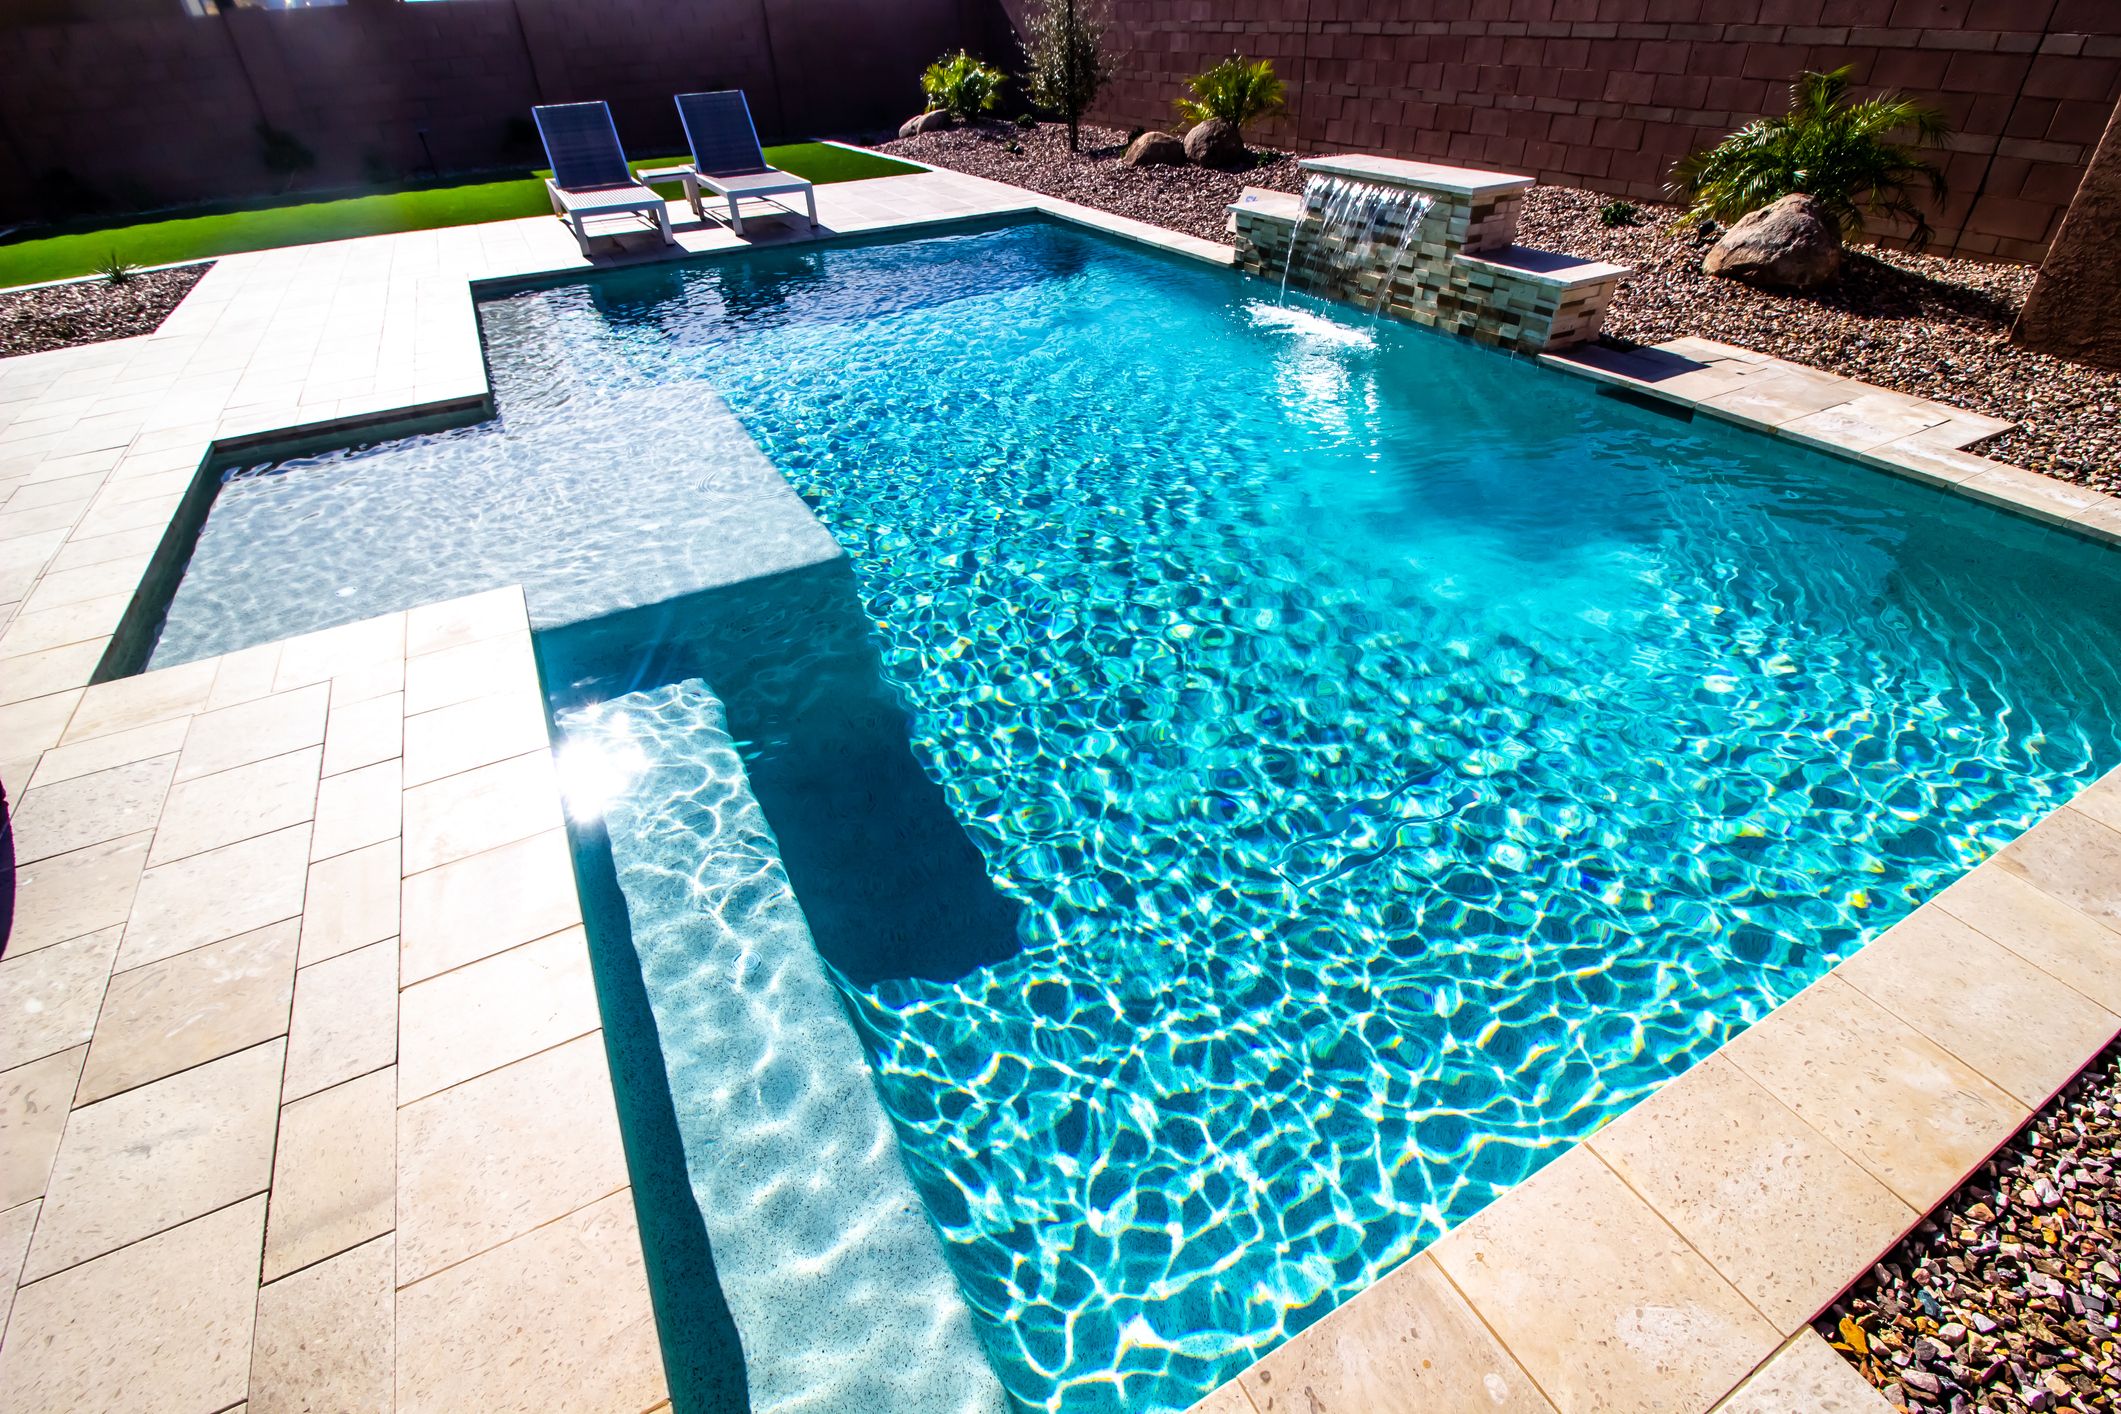 Why substantial pools are the best choice